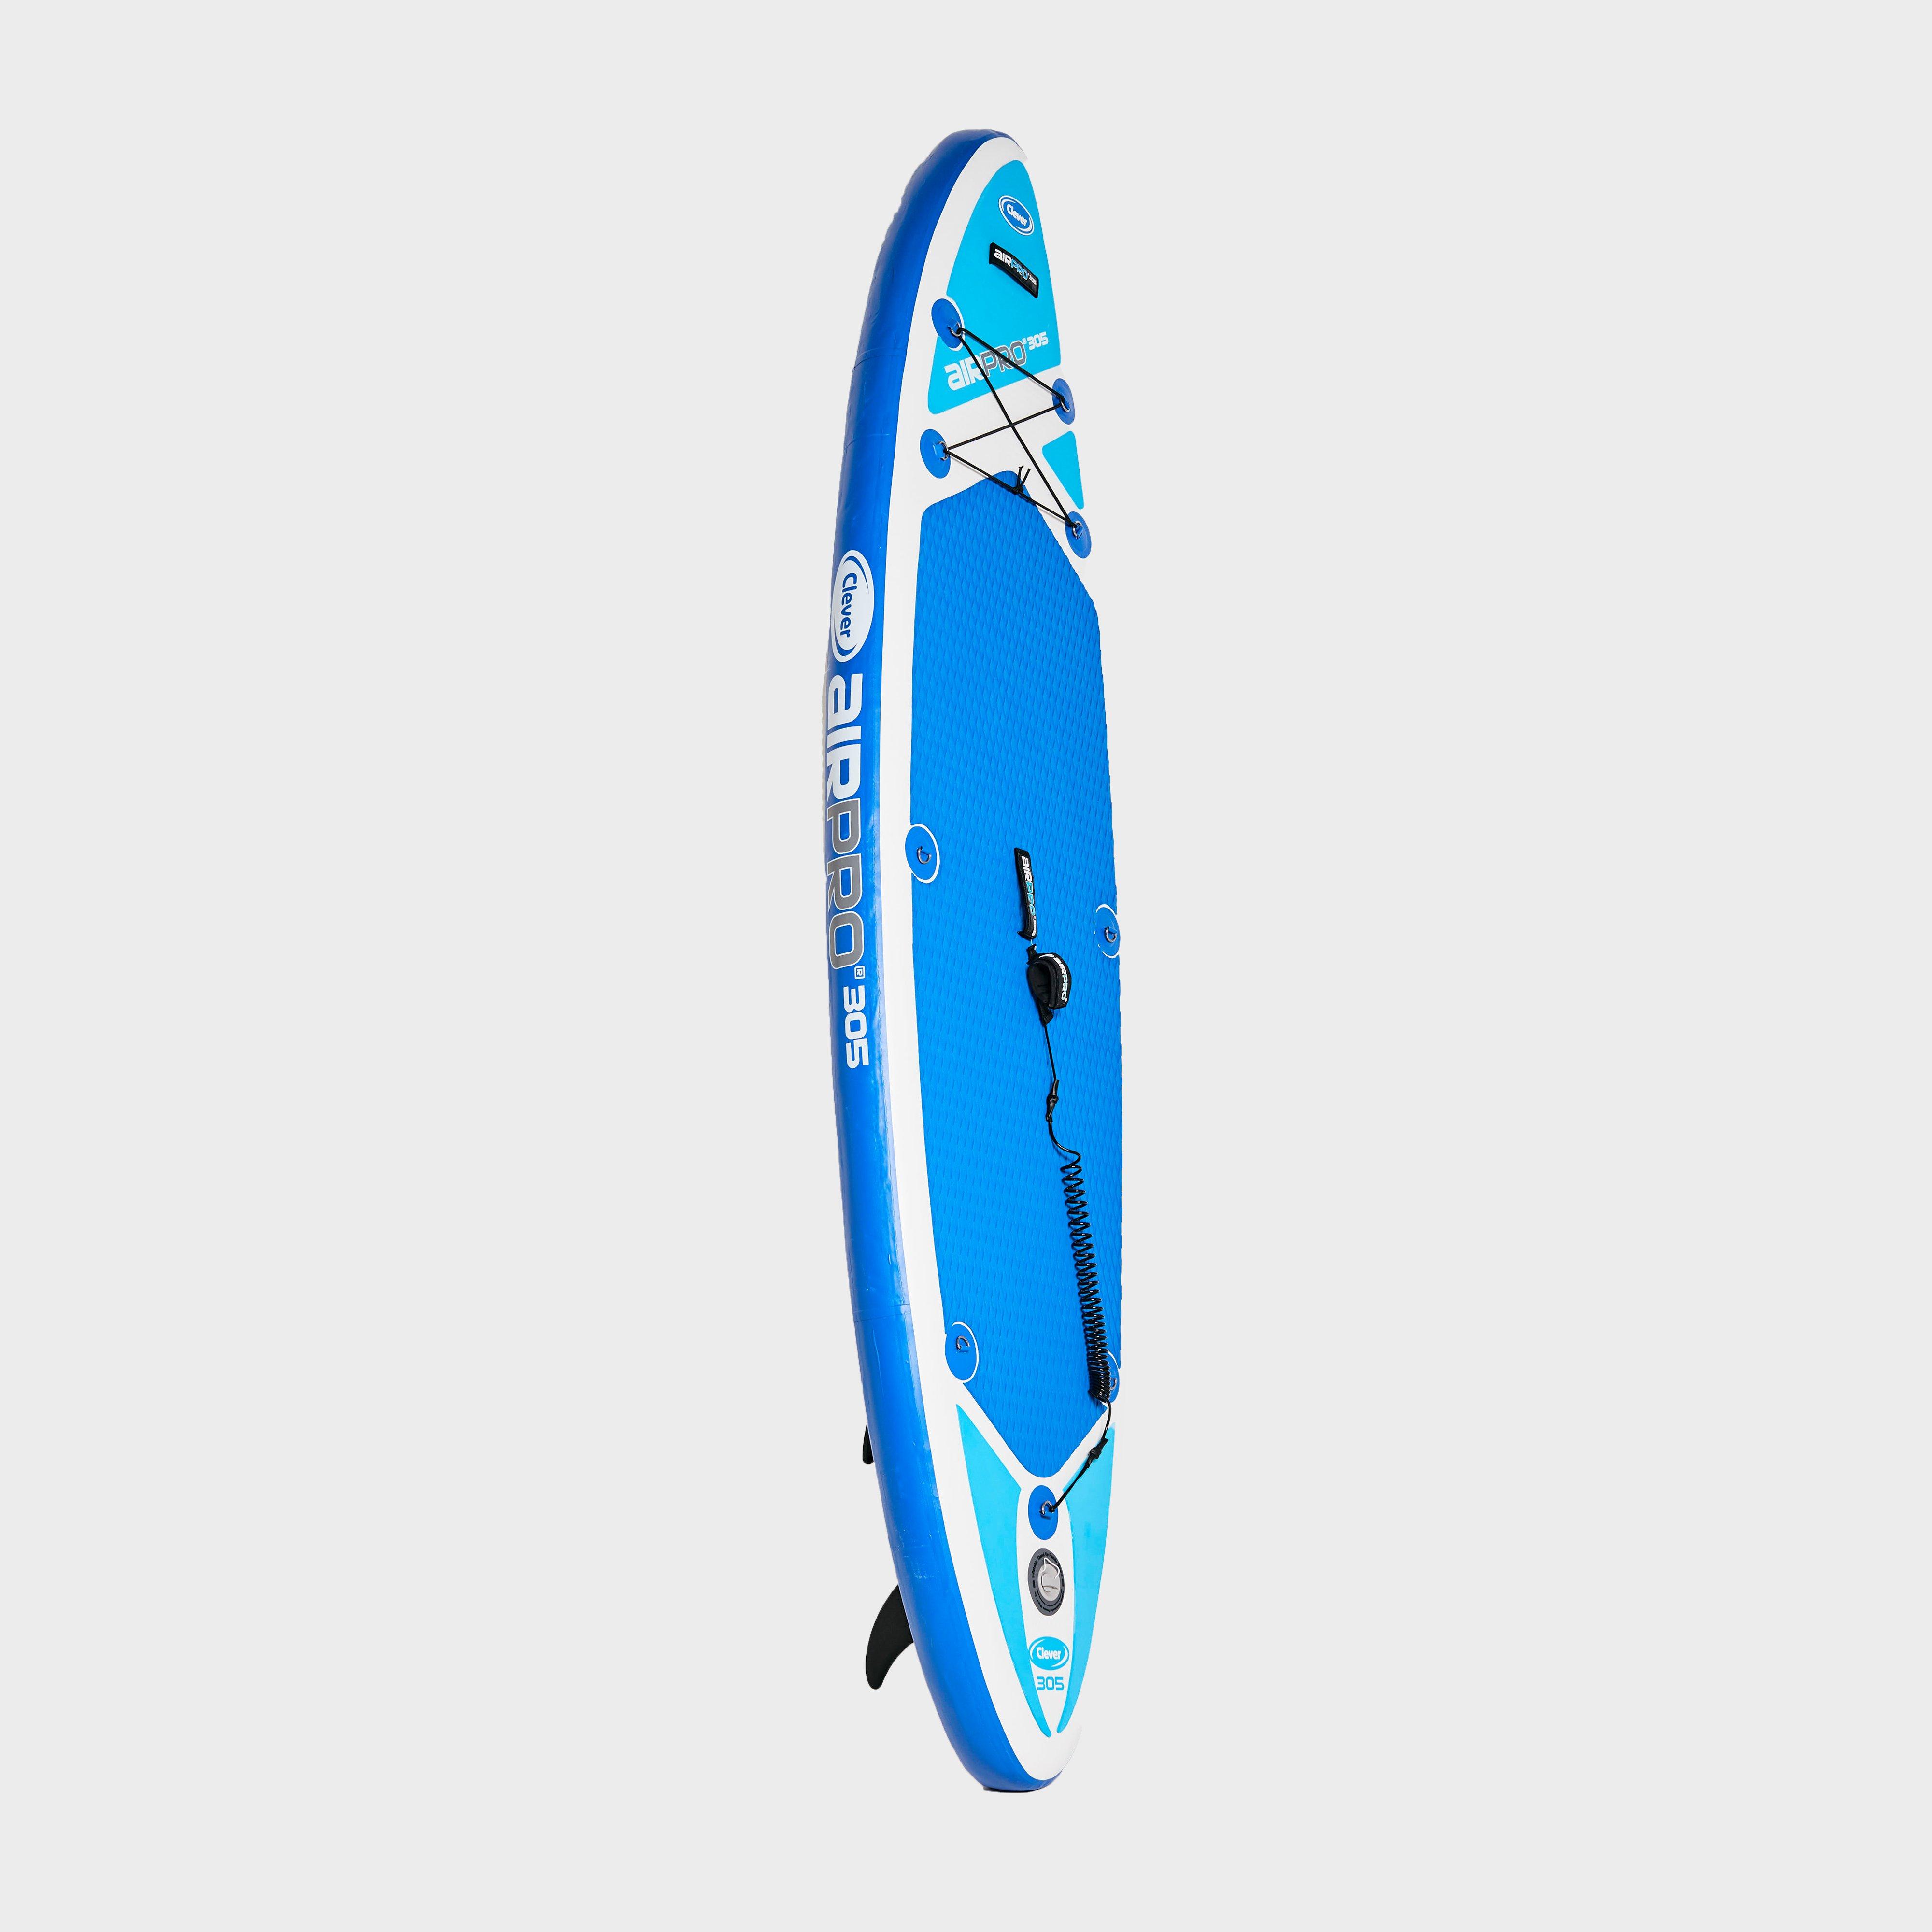 Clever Aipro Airpro 305 (10FT) Inflatable Stand-up Paddleboard Review